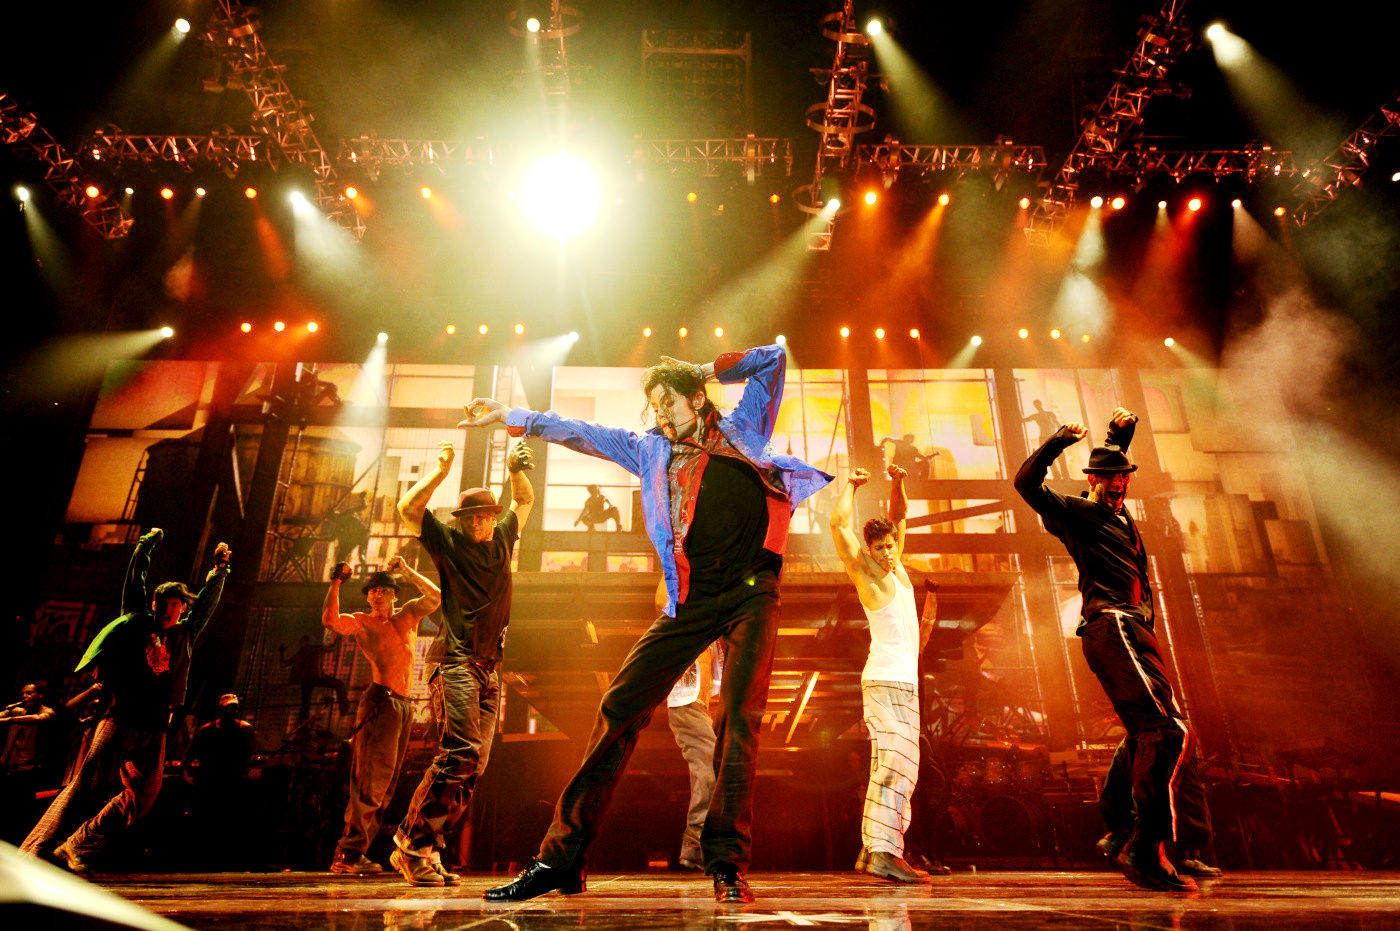 Michael Jackson in Sony Pictures Entertainment's This Is It (2009). Photo credit by Kevin Mazur.